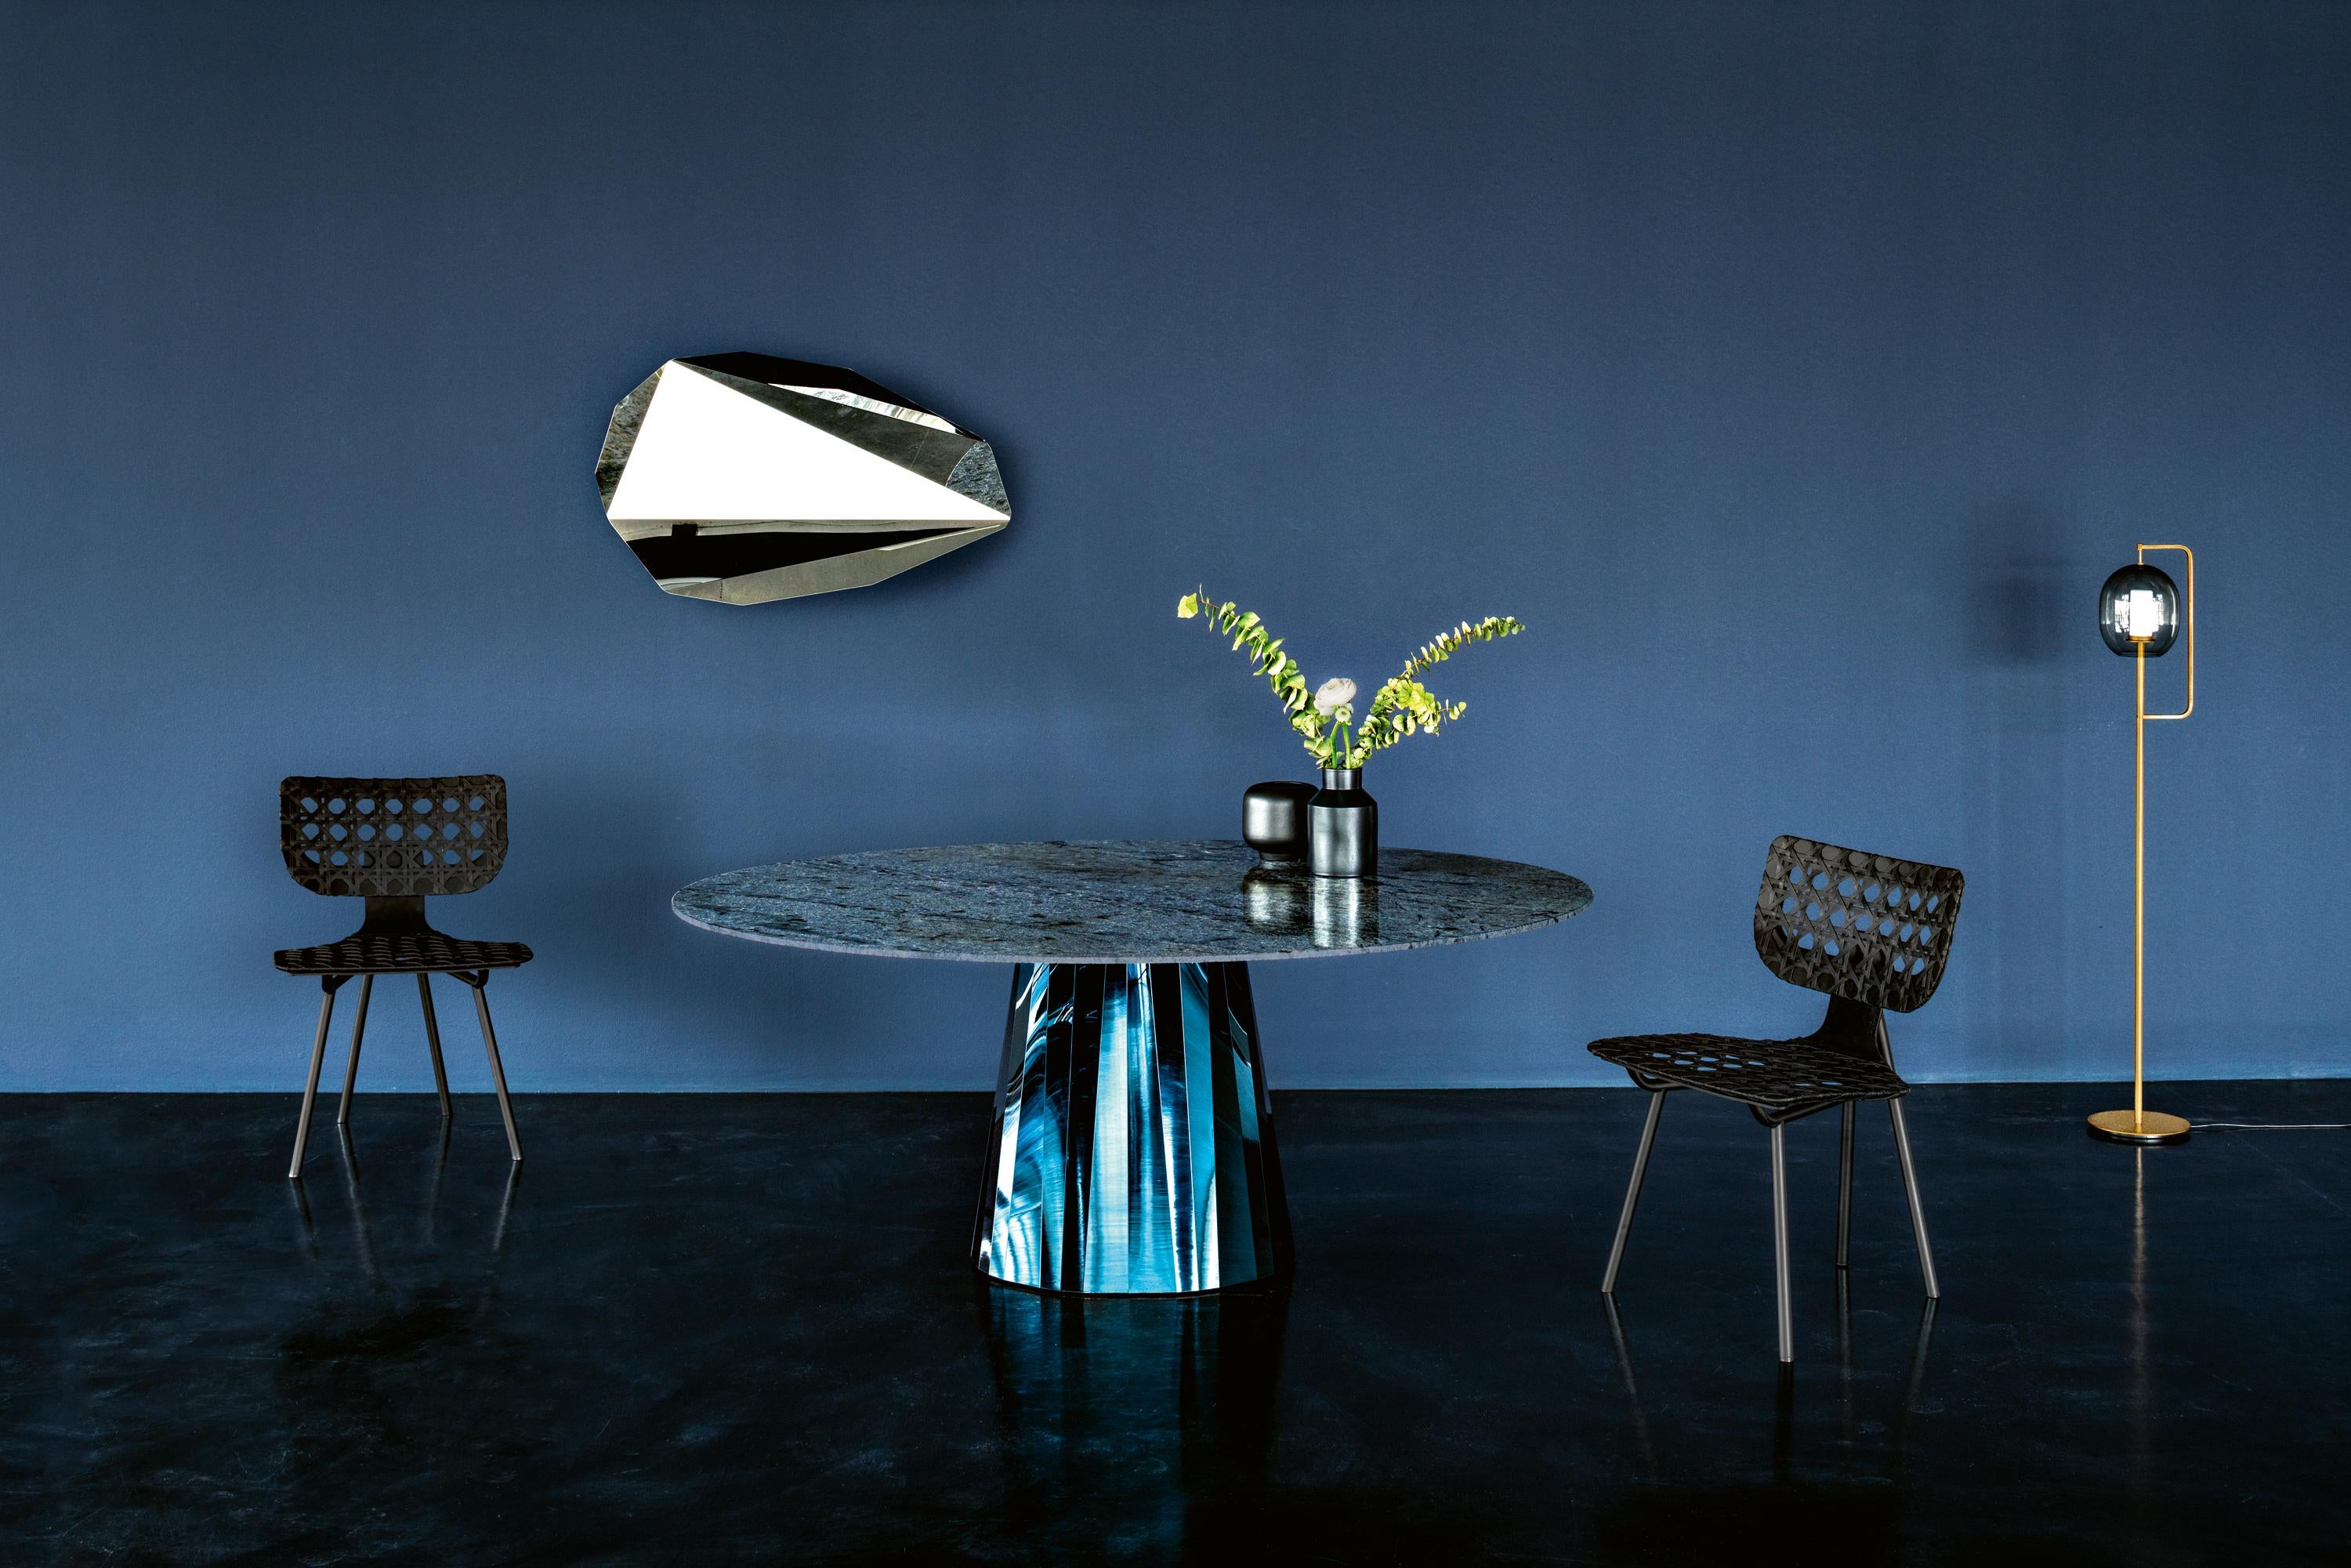 With the Pli table series French designer Victoria Wilmotte brings objects of unusual crystalline elegance and astonishing geometry to living environments, dining rooms or entrance areas. The bends and folds that gave Pli its name almost make the